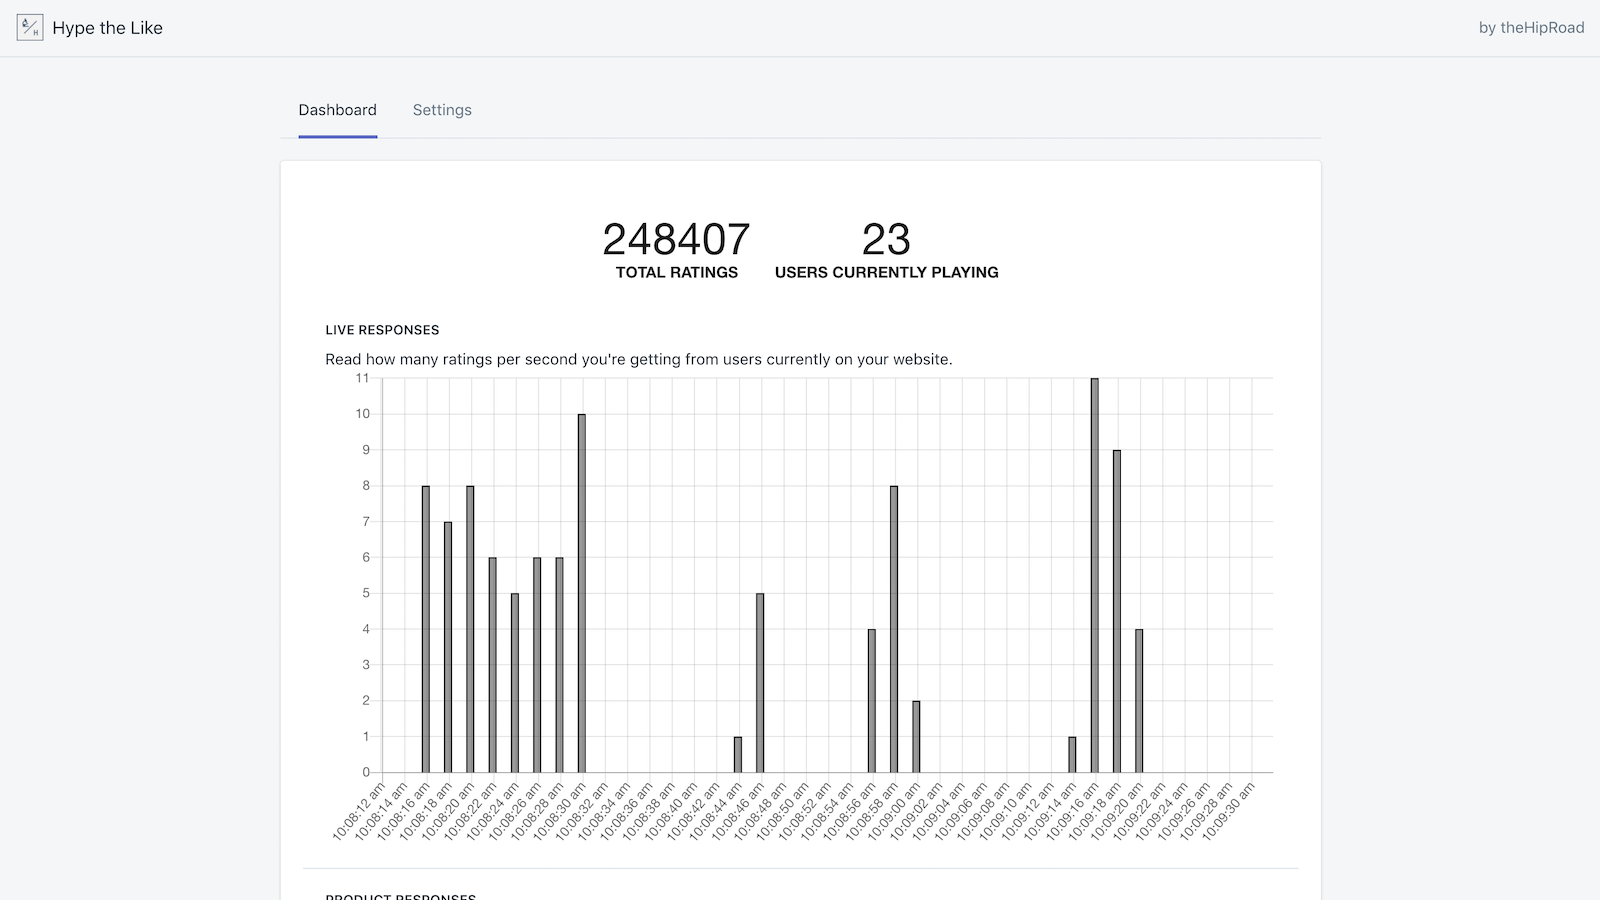 Live realtime analytics relay your user's immediate feedback.